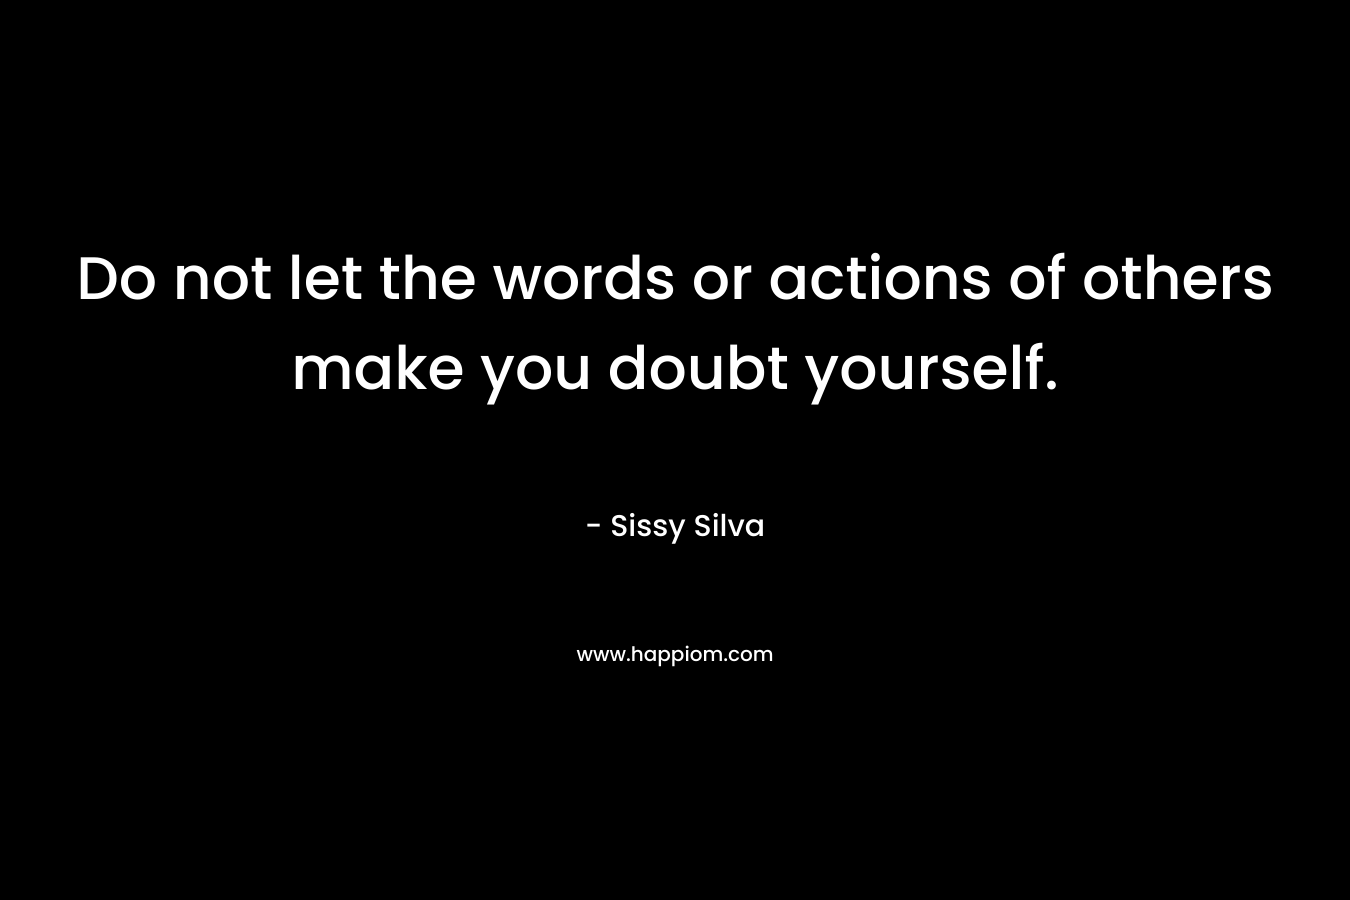 Do not let the words or actions of others make you doubt yourself. – Sissy Silva